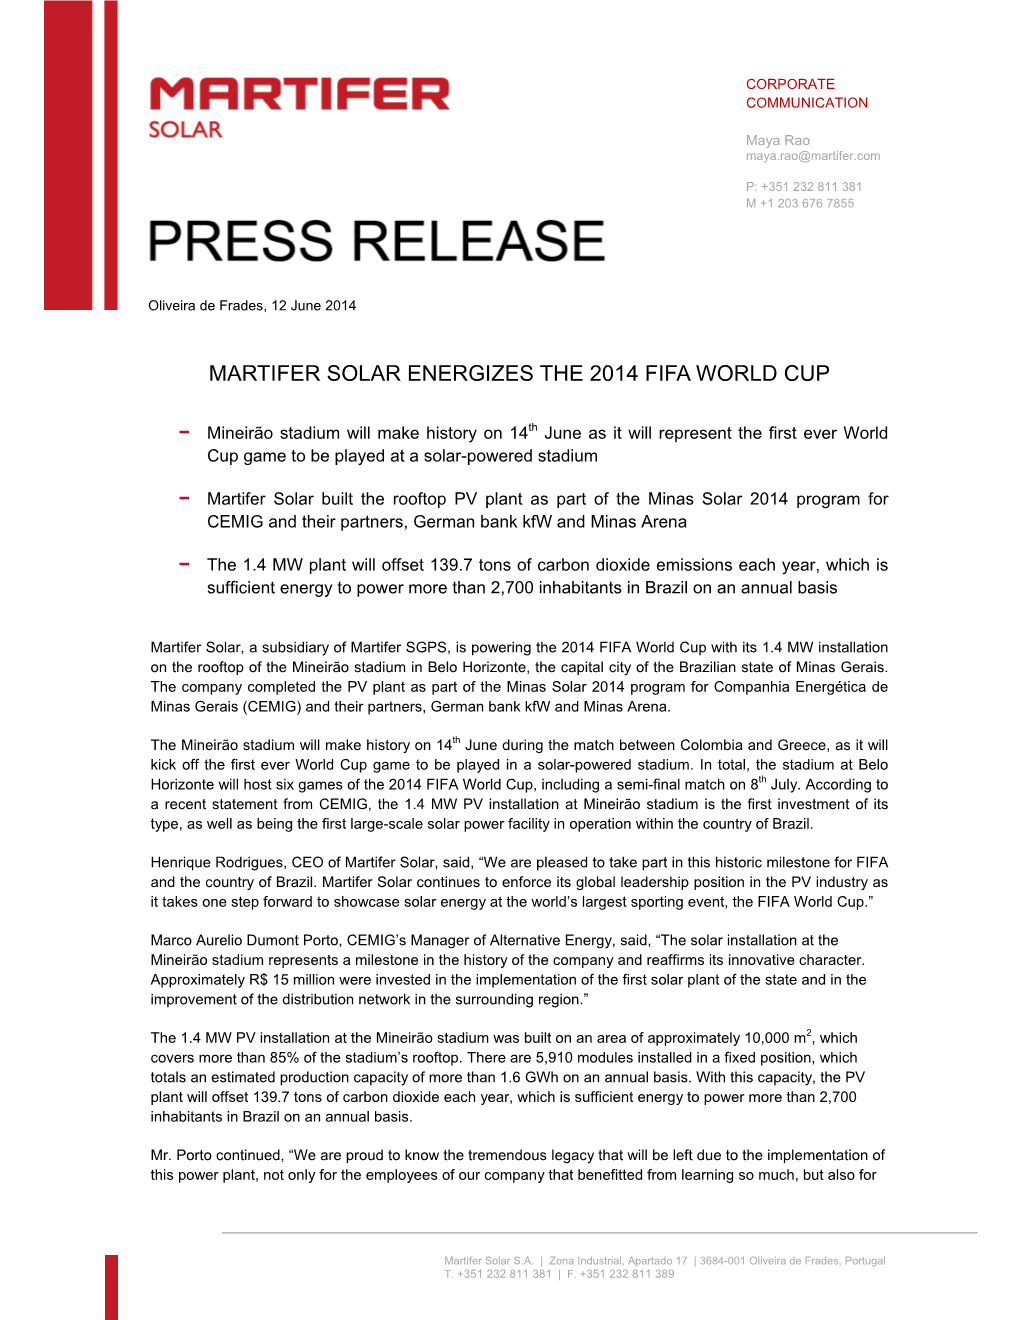 Martifer Solar Energizes the 2014 Fifa World Cup